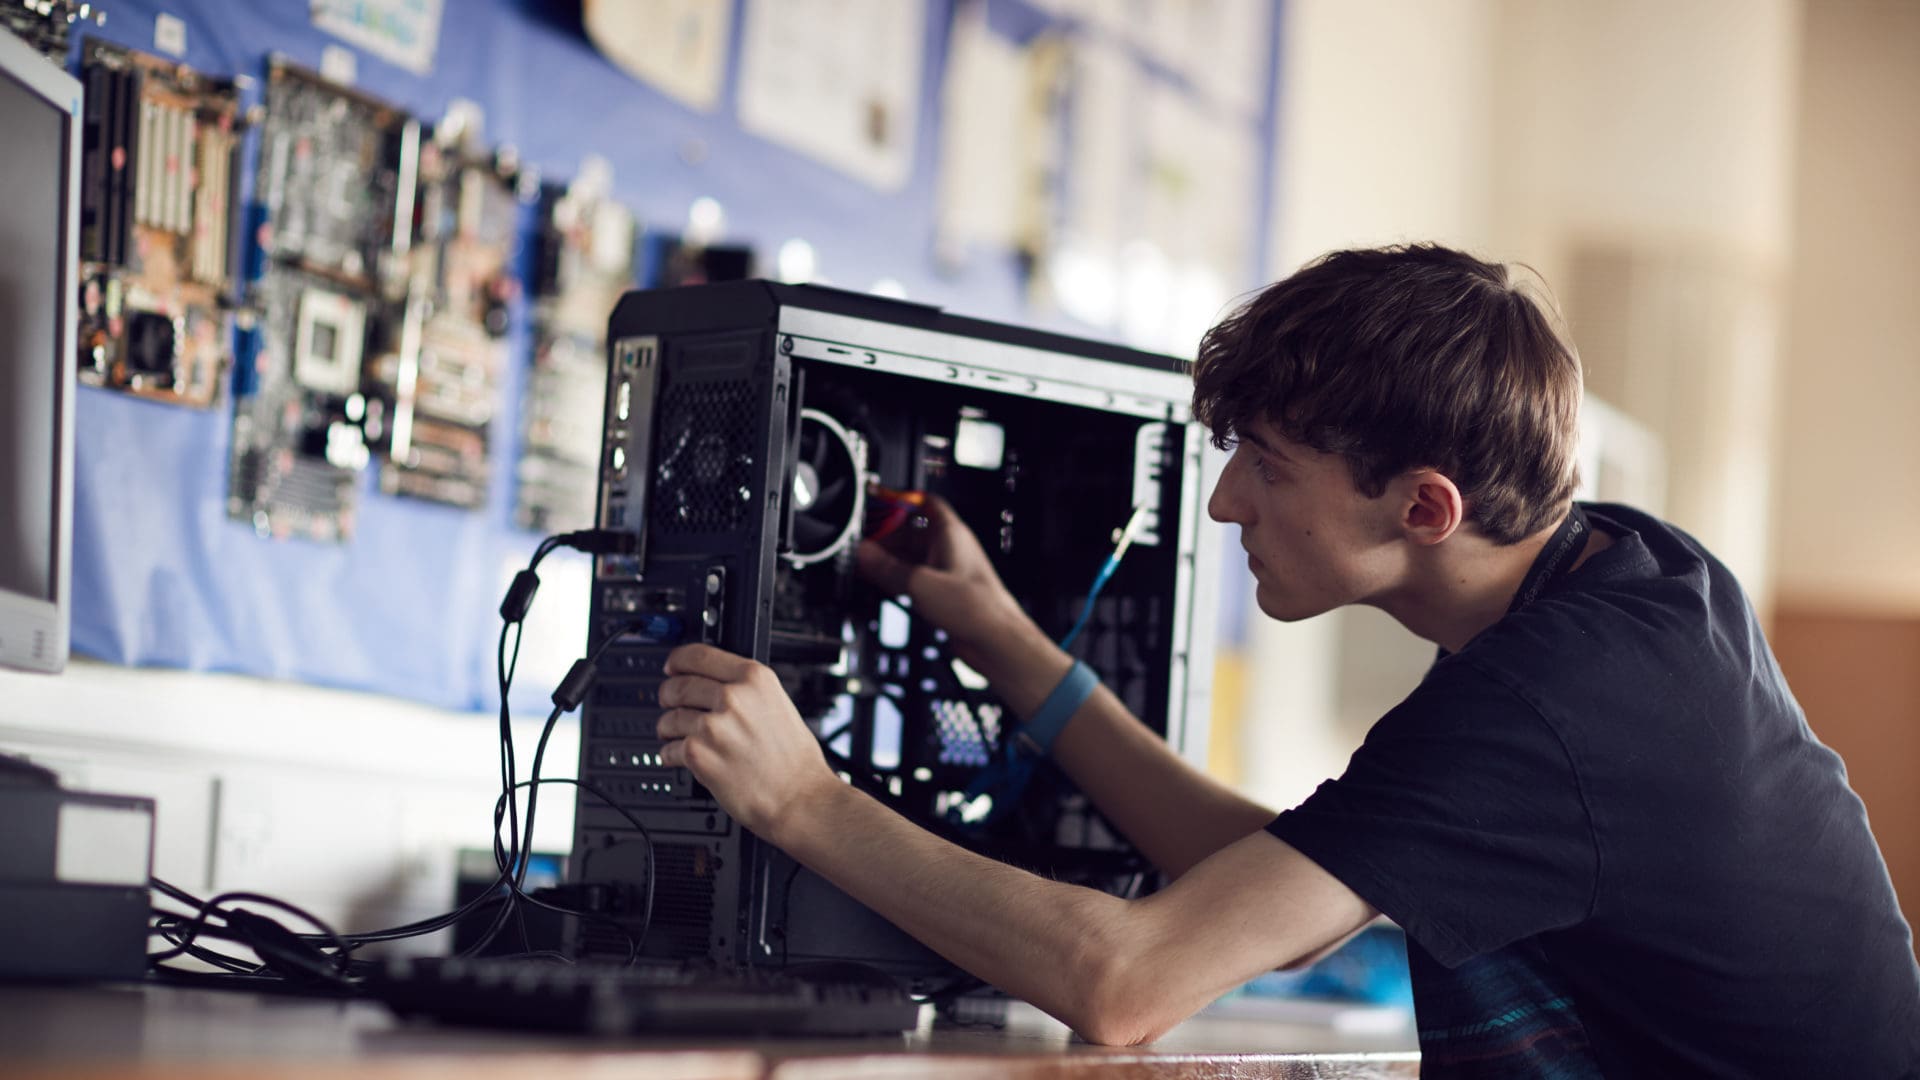 City of Bristol College student focusing on fixing a computer on an IT course